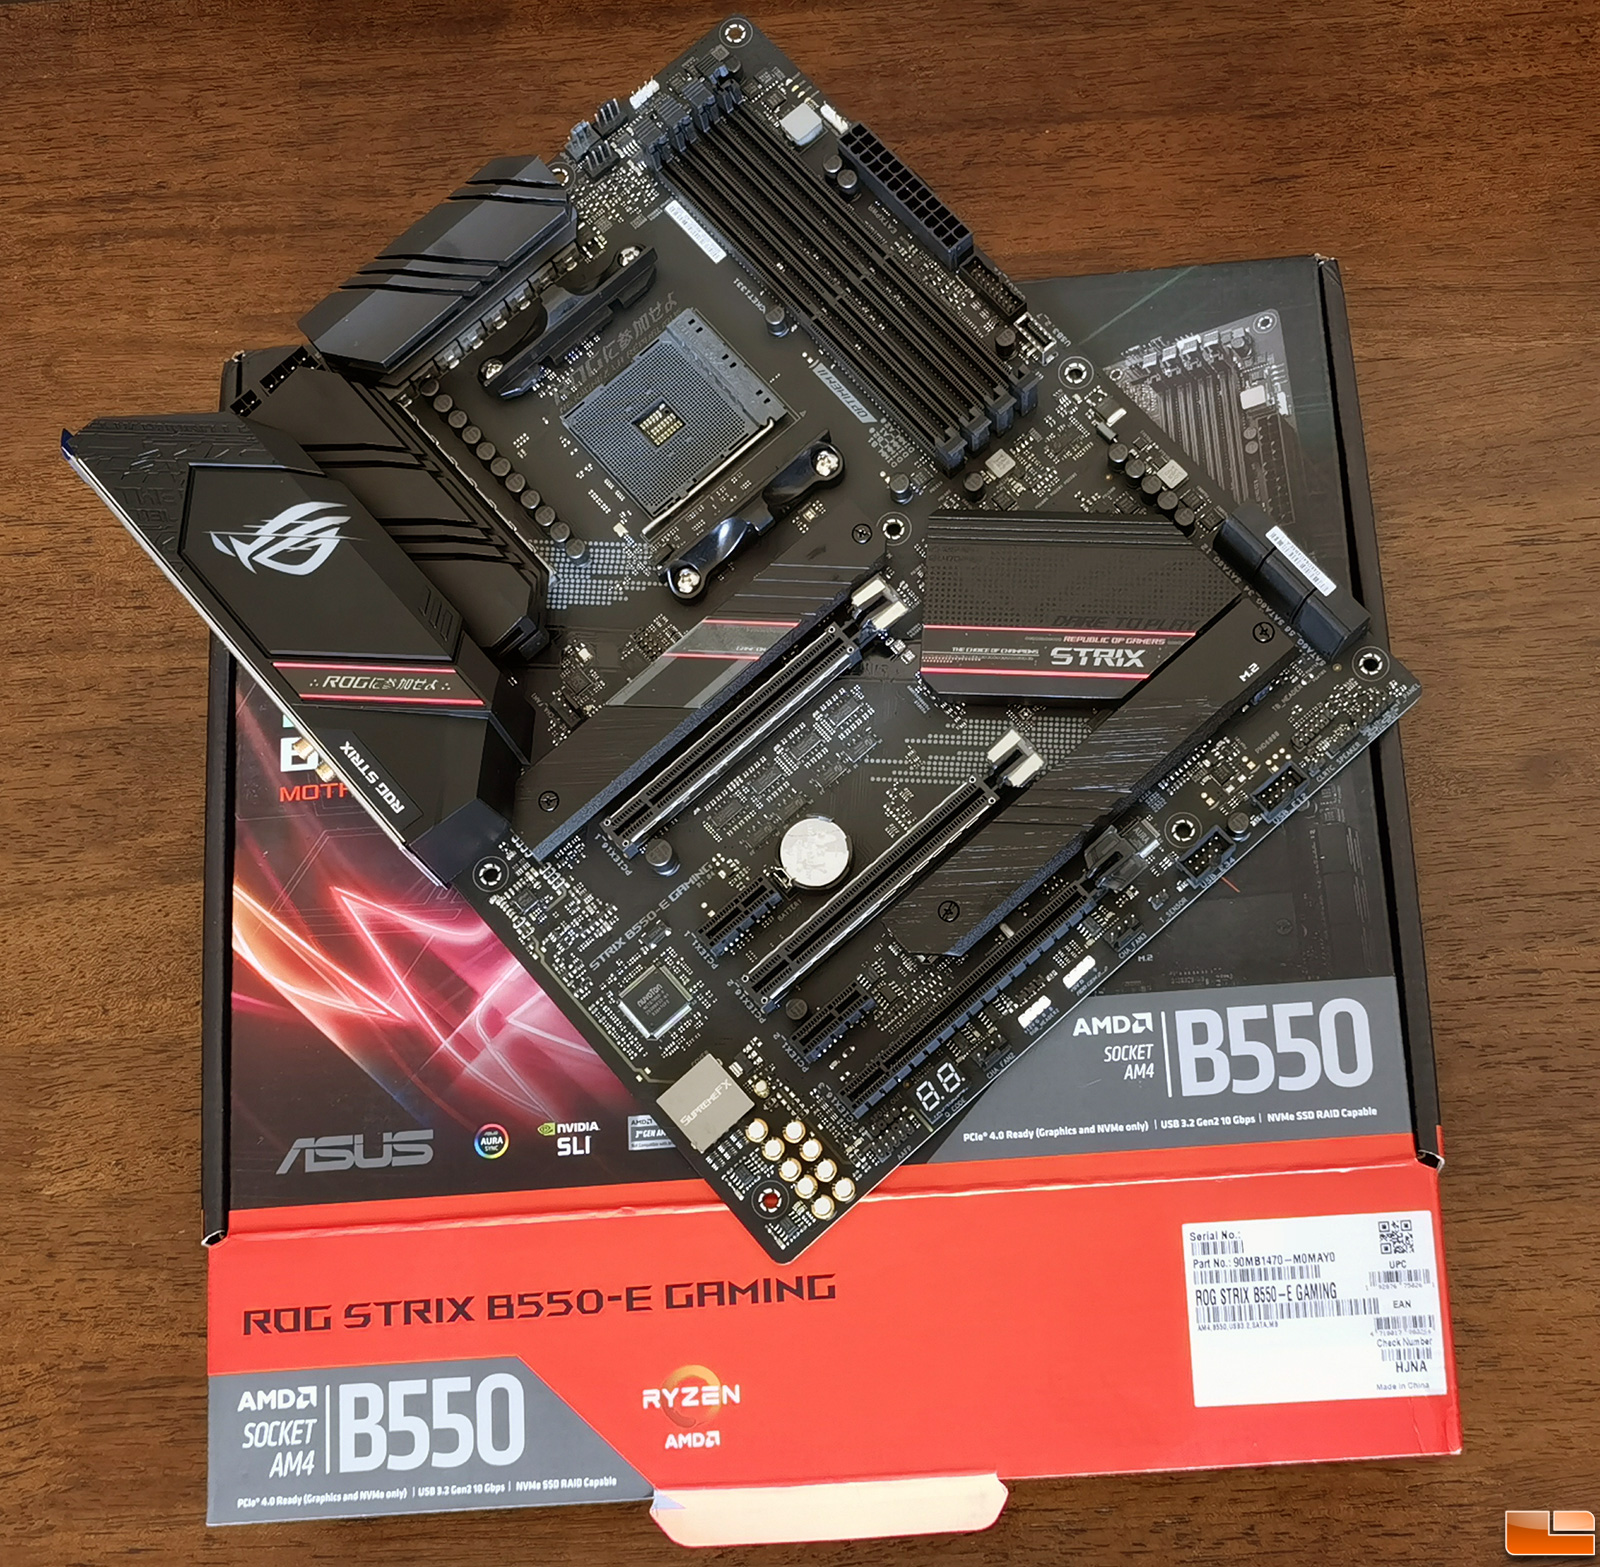 Why You Need The ASUS STRIX Legit Motherboard GAMING Reviews B550-E - ROG Review